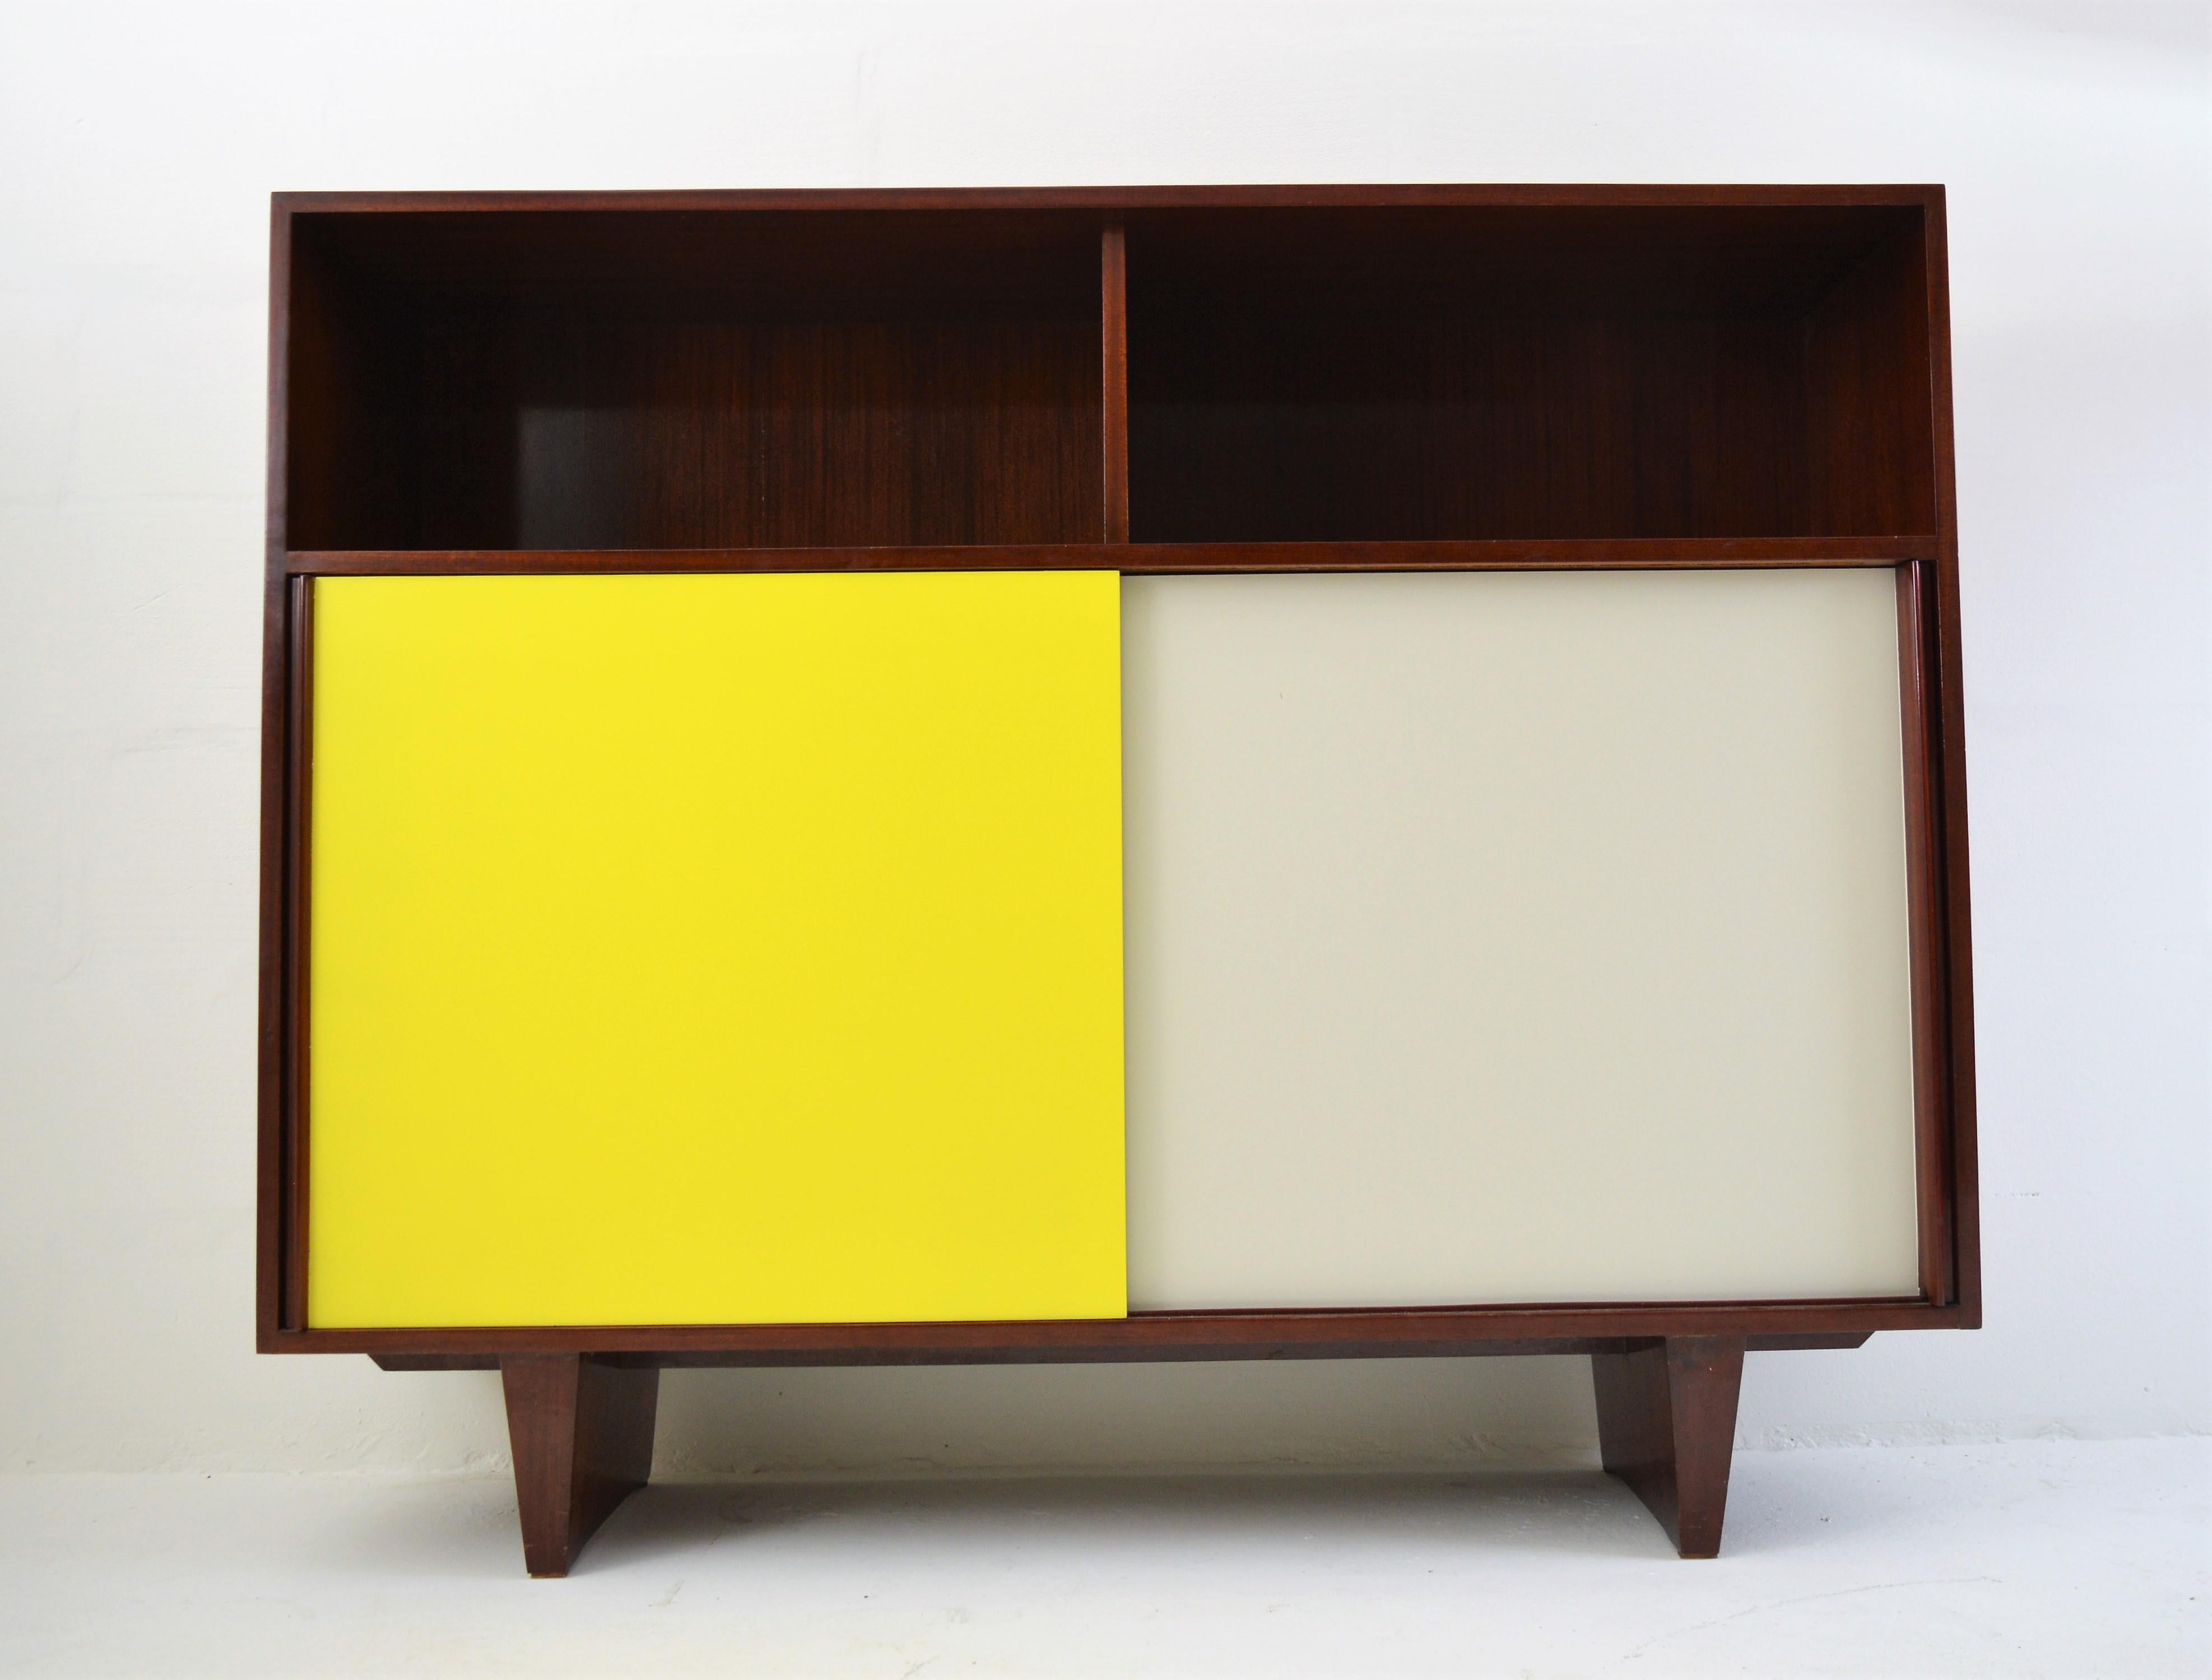 Lacquered De Coene Mahogany Cabinet with Bookcase and Collored Sliding-Doors